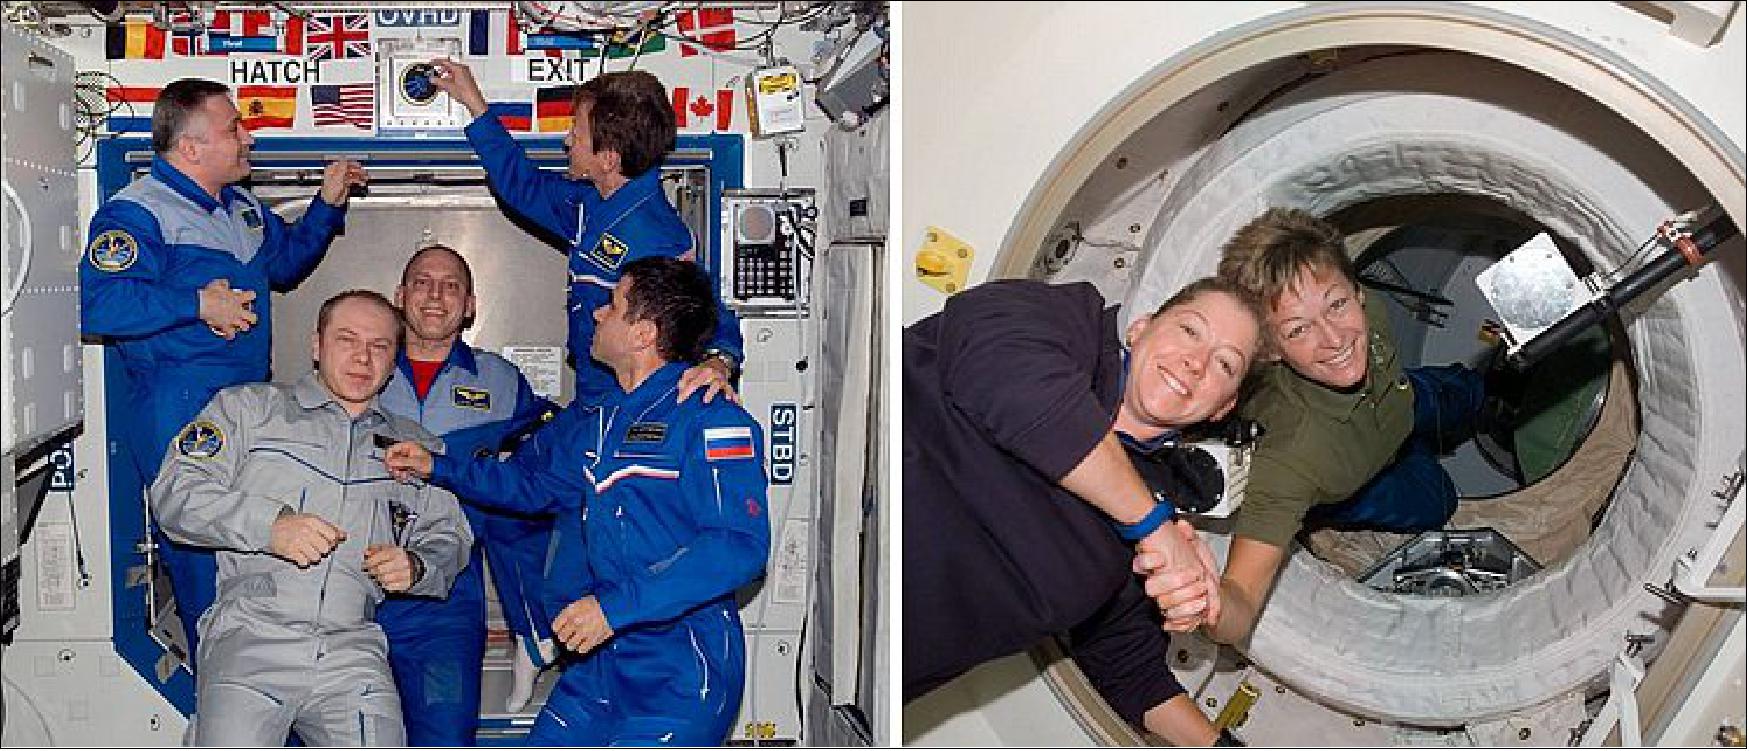 Figure 100: Left: During the change of command ceremony, Expedition 16 Commander Whitson (top right) hangs the crew's patch in the Destiny module. Right: STS-120 Commander Melroy (at left) and ISS Expedition 16 Commander Whitson meet at the hatch between the two vehicles (image credit: NASA/JSC)